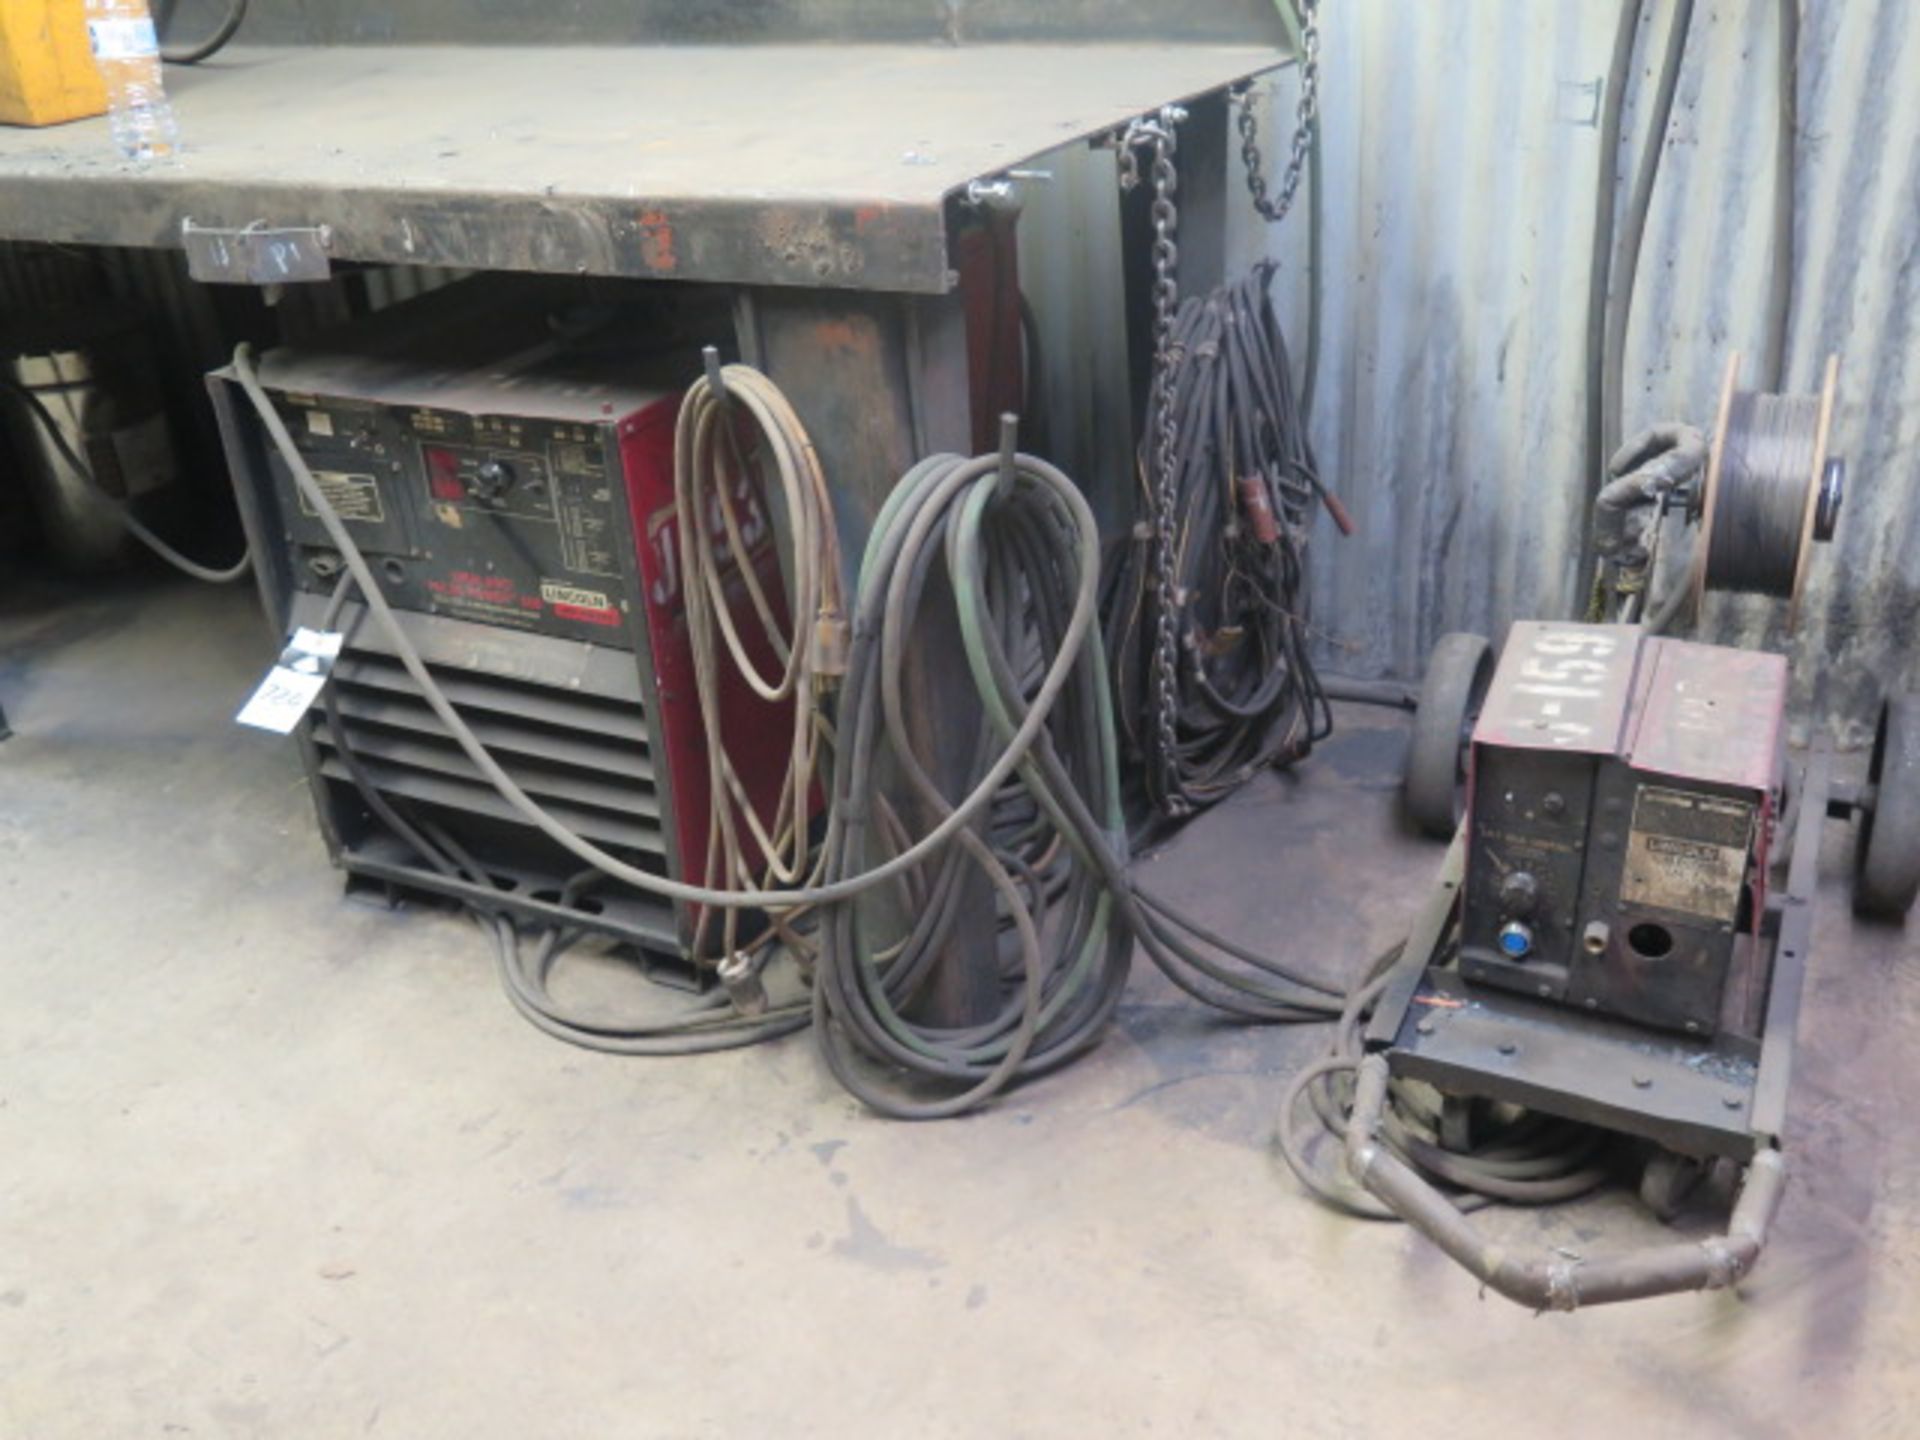 Lincoln Idealarc Power Pulse 500 CV-DC Arc Welding Power Source w/ Lincoln LN-7 Wire Feeder - Image 2 of 3